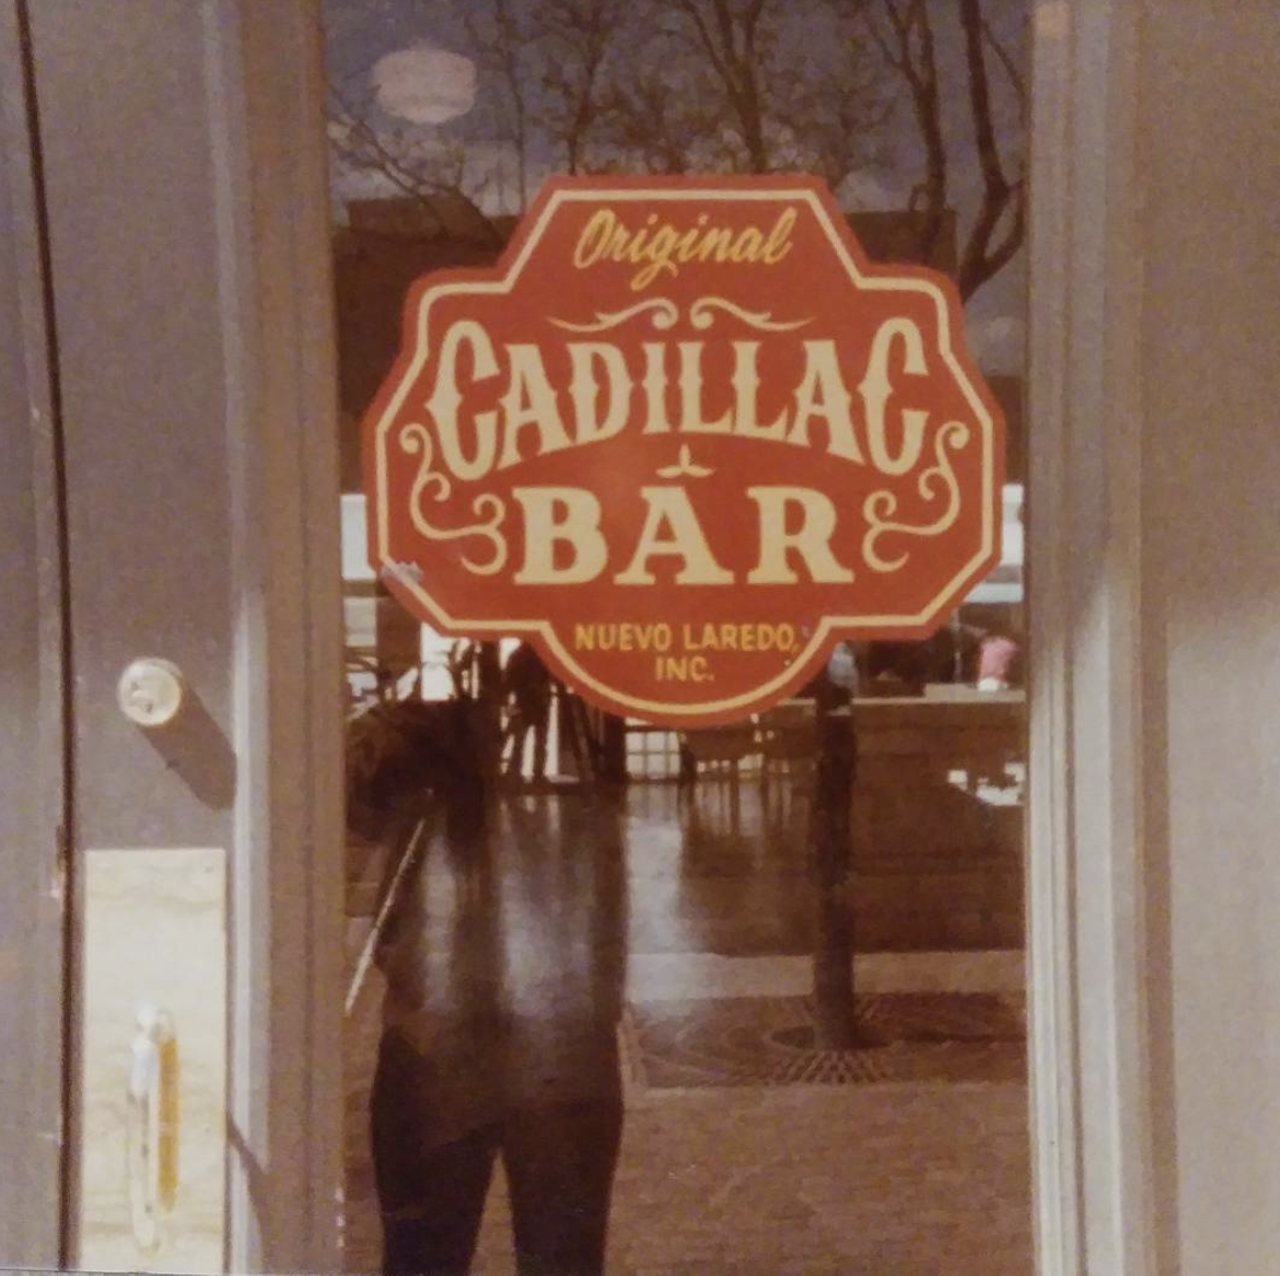 Cadillac Bar
This iconic downtown watering hole was a casualty of the pandemic, closing its doors after decades serving the courthouse-area community ice cold brews and post-proceedings shots. Reportedly, the building was constructed in the 1870s and features what are said to be the first electric streetlights in Texas.  
Photo via Instagram / texas.is.the.reason